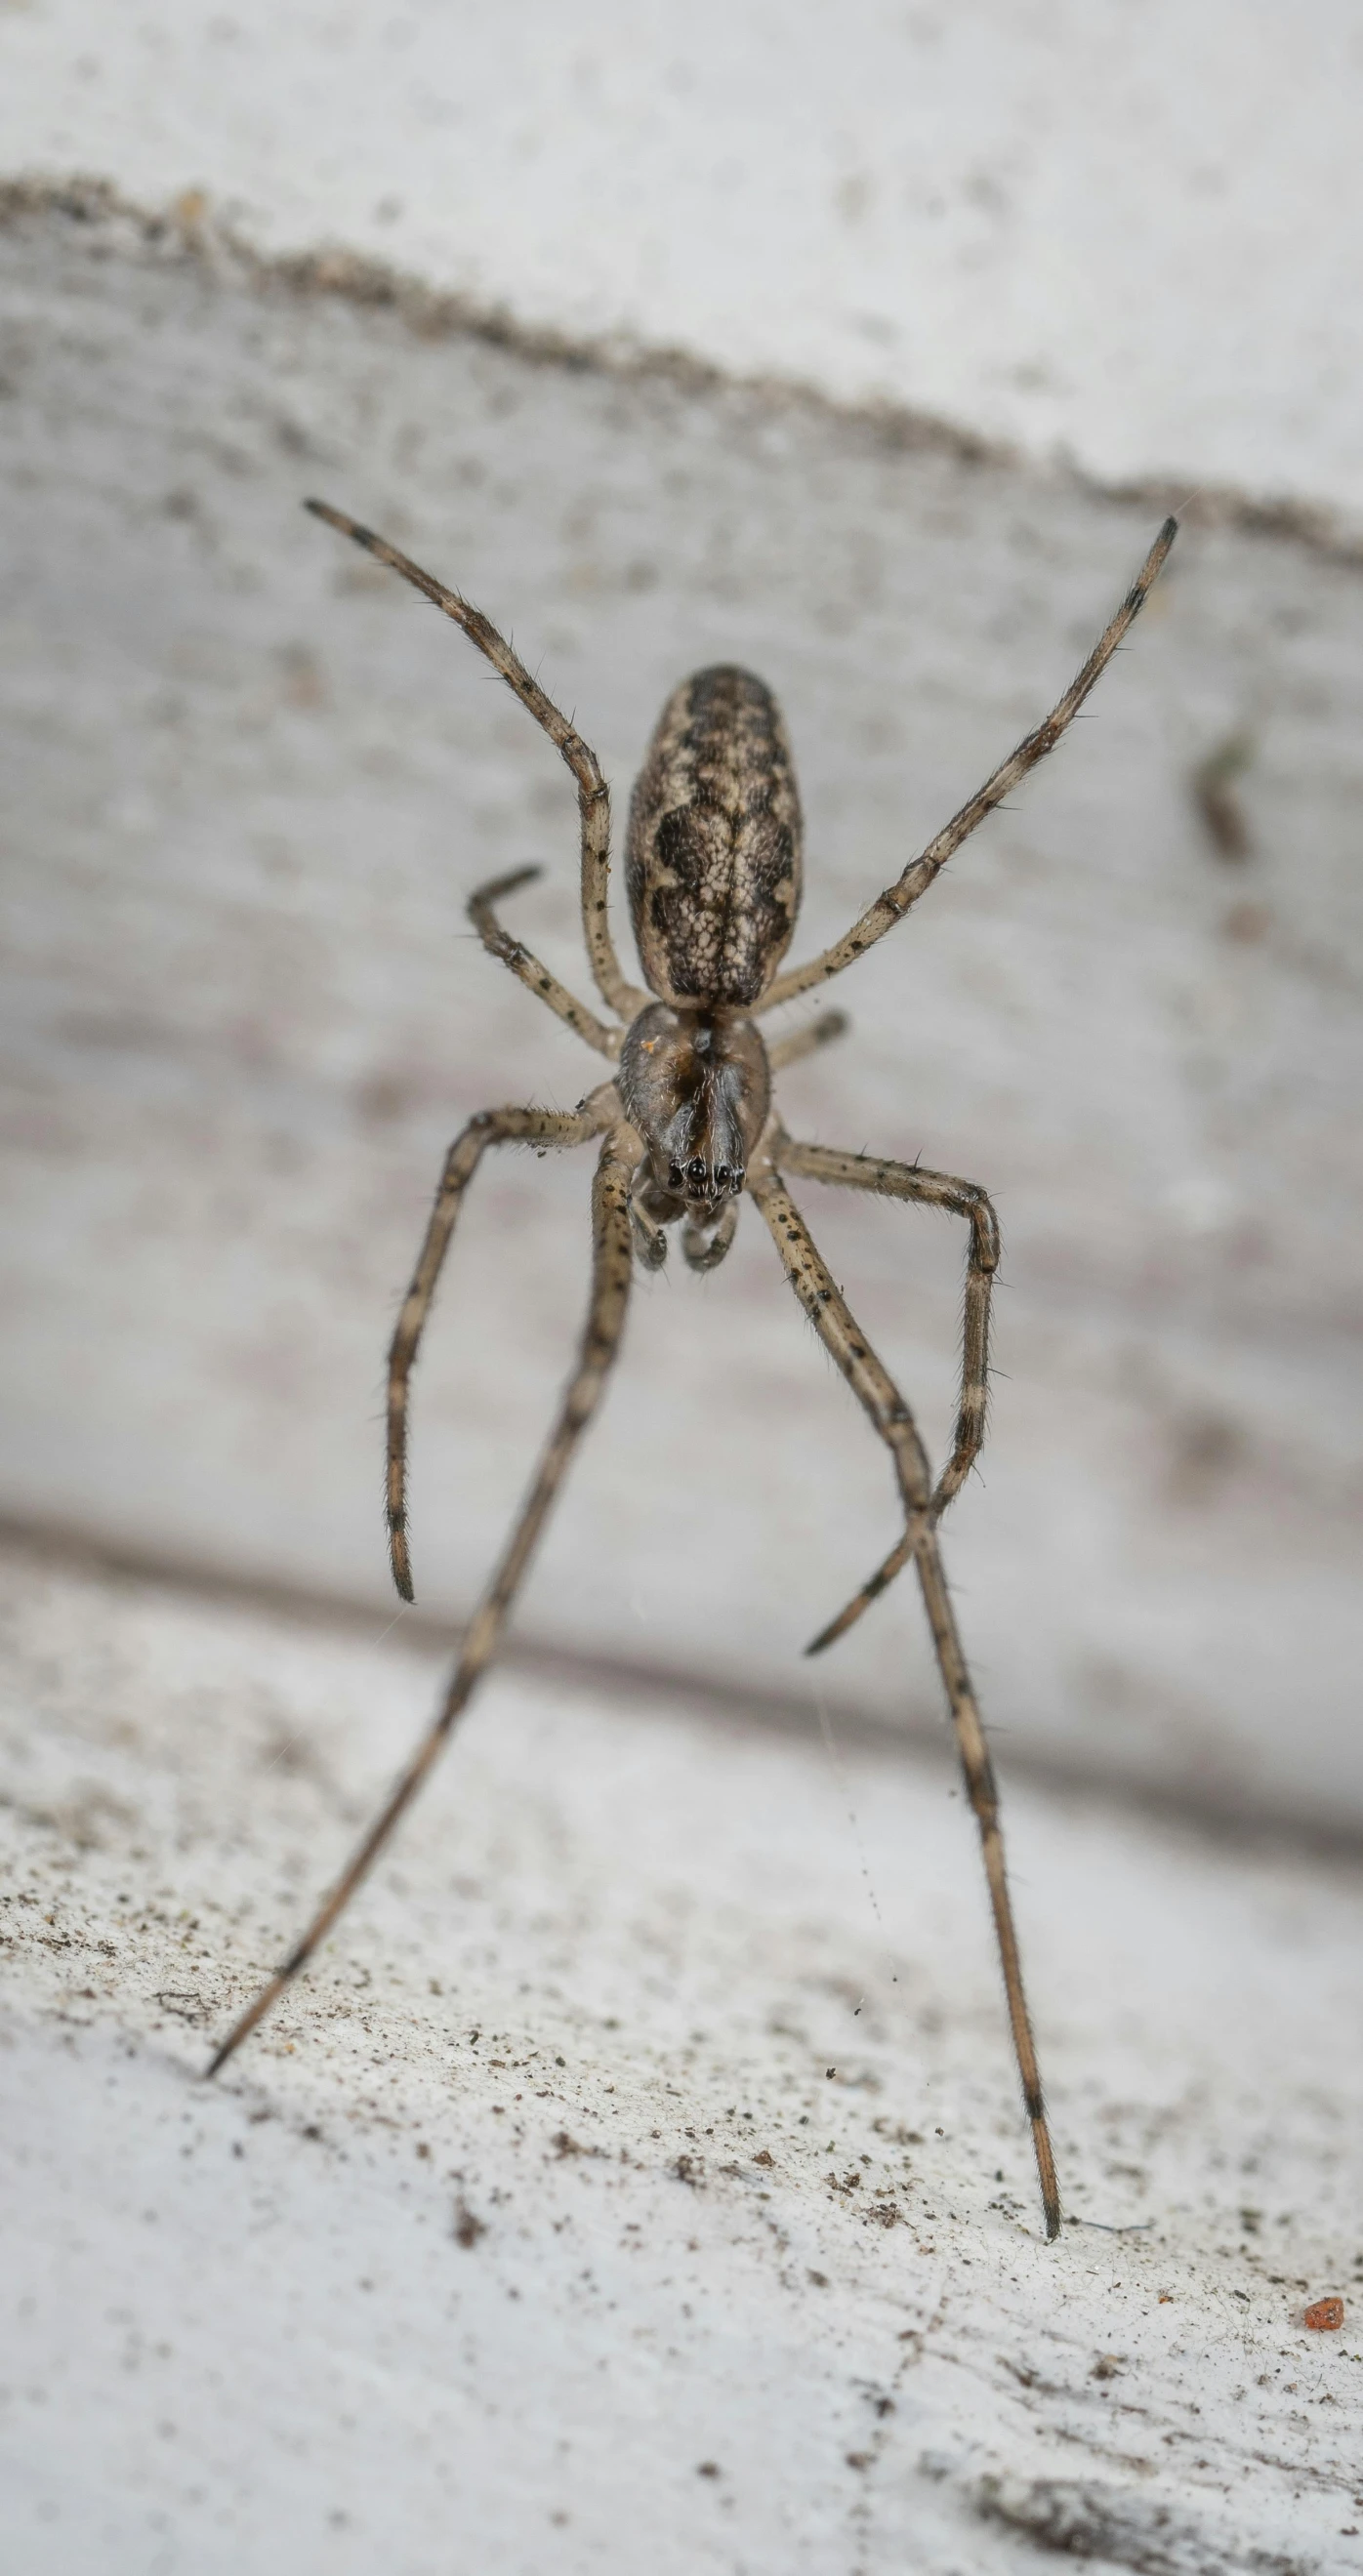 the very long legged spider is very close to the camera